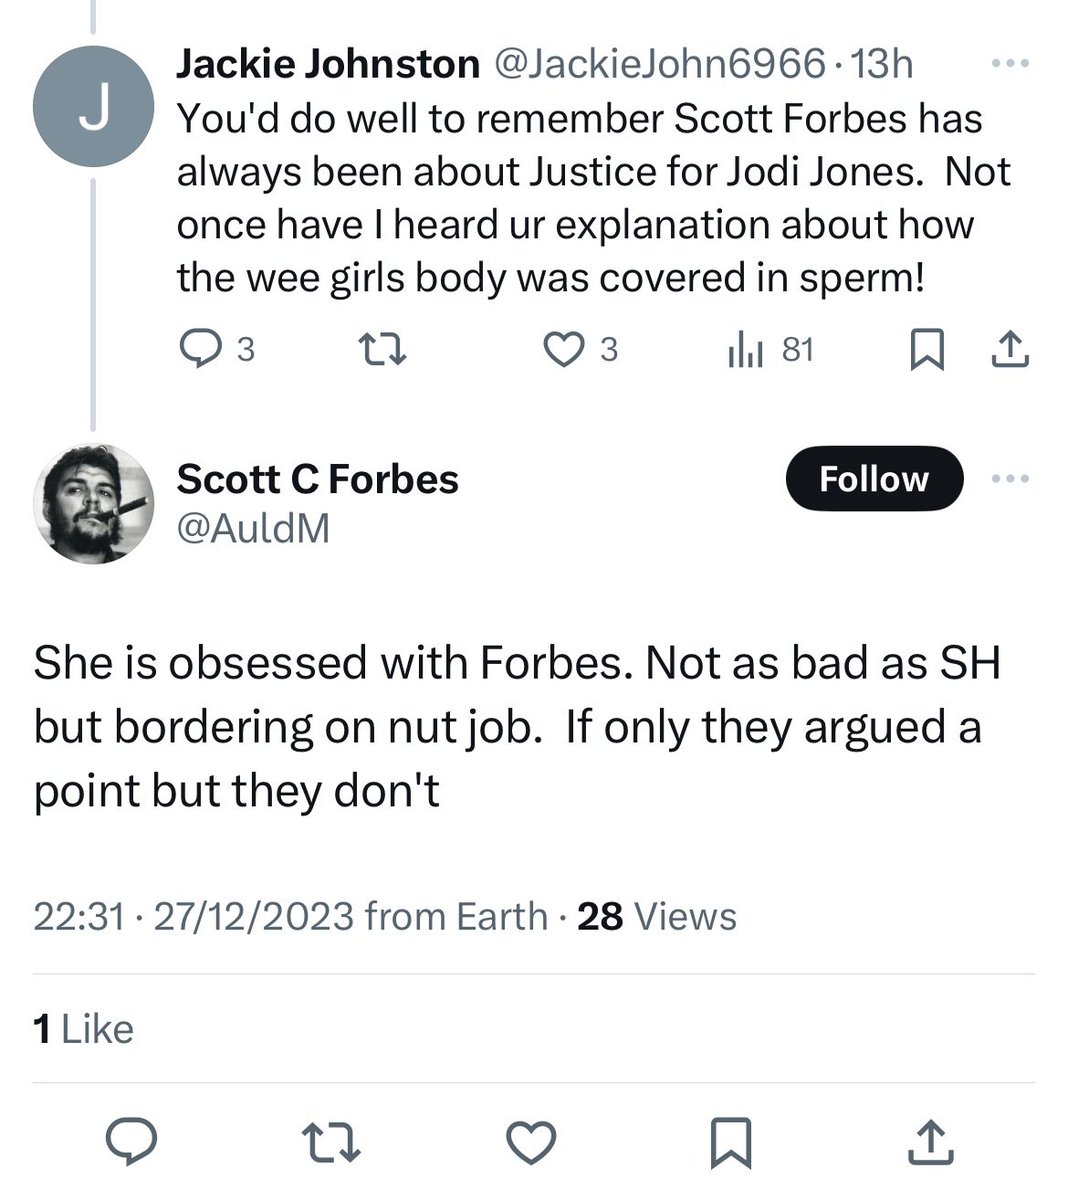 Having a conversation with yourself and forgetting which account you’re logged into. How many accounts is Scott Forbes using to spread his lies?